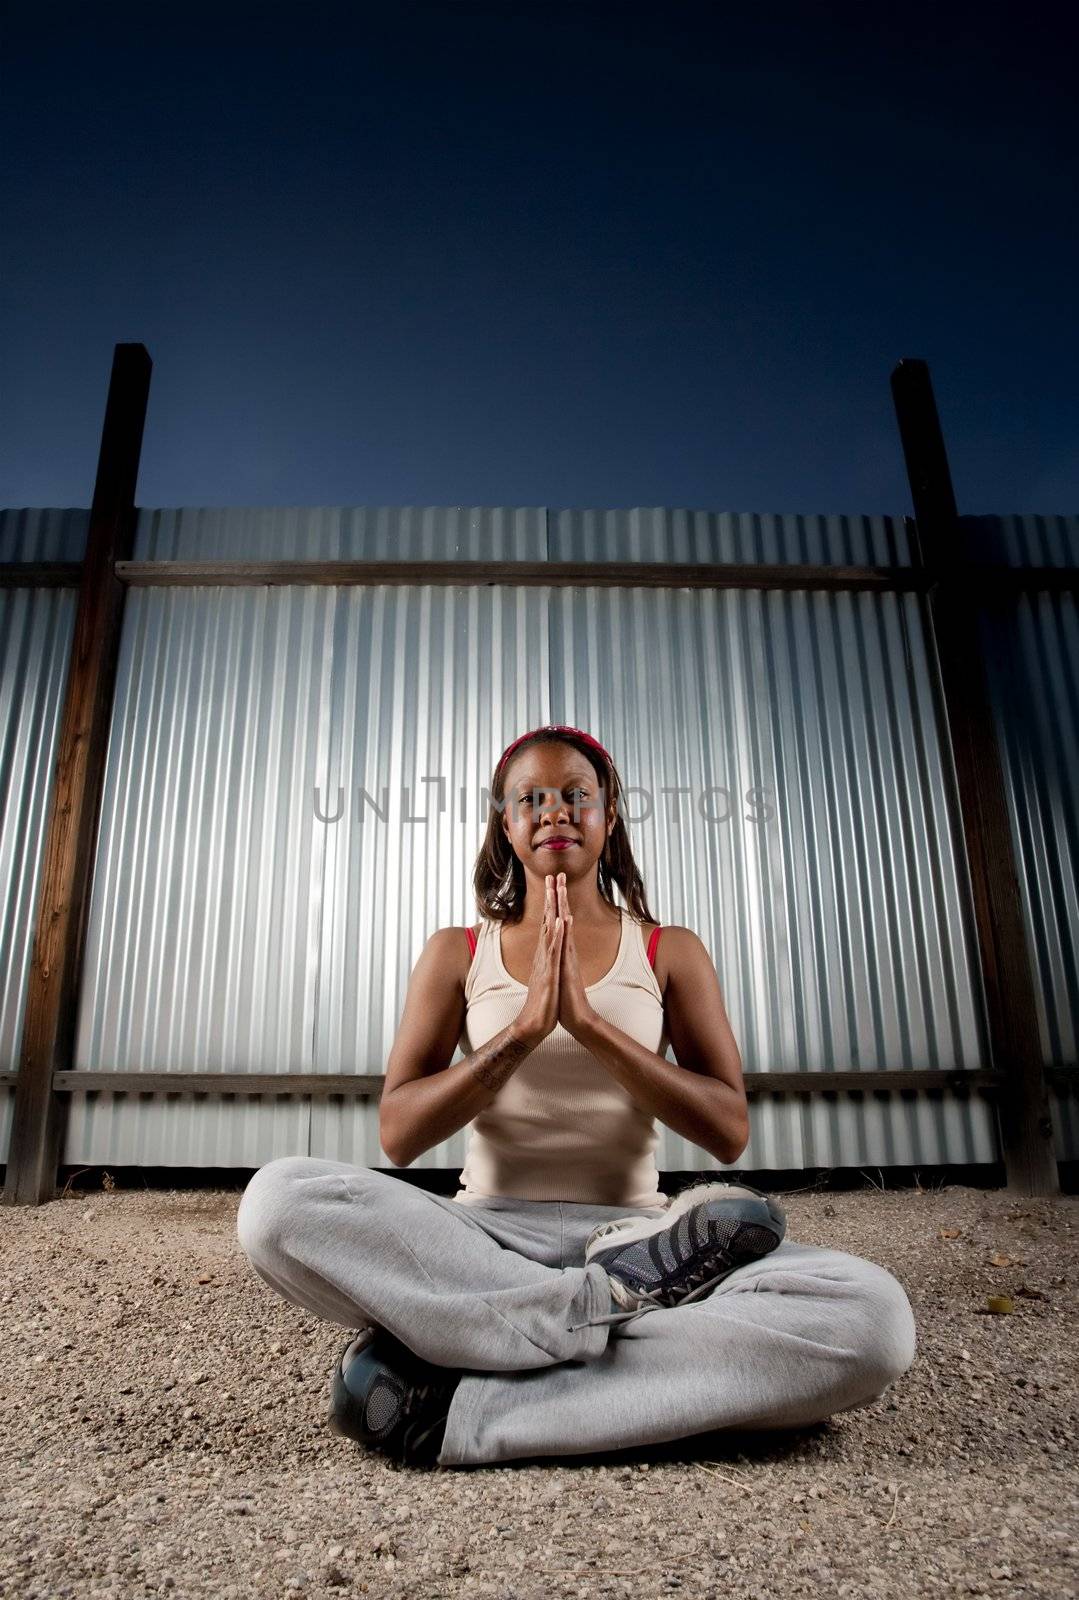 African-American woman meditating in front of corrugated metal